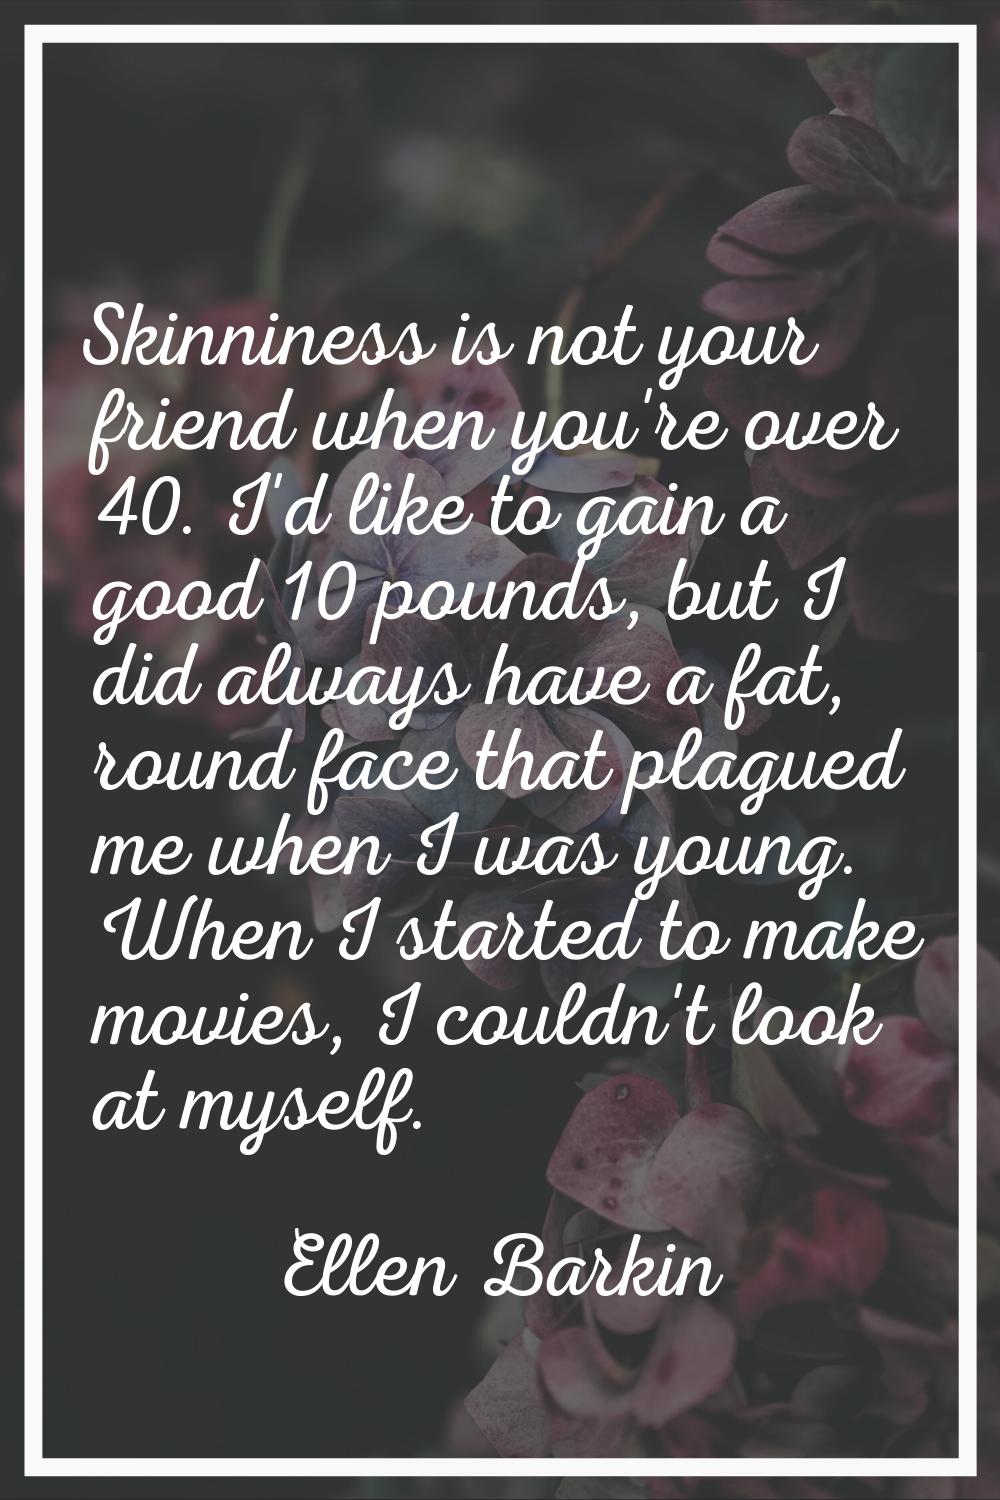 Skinniness is not your friend when you're over 40. I'd like to gain a good 10 pounds, but I did alw